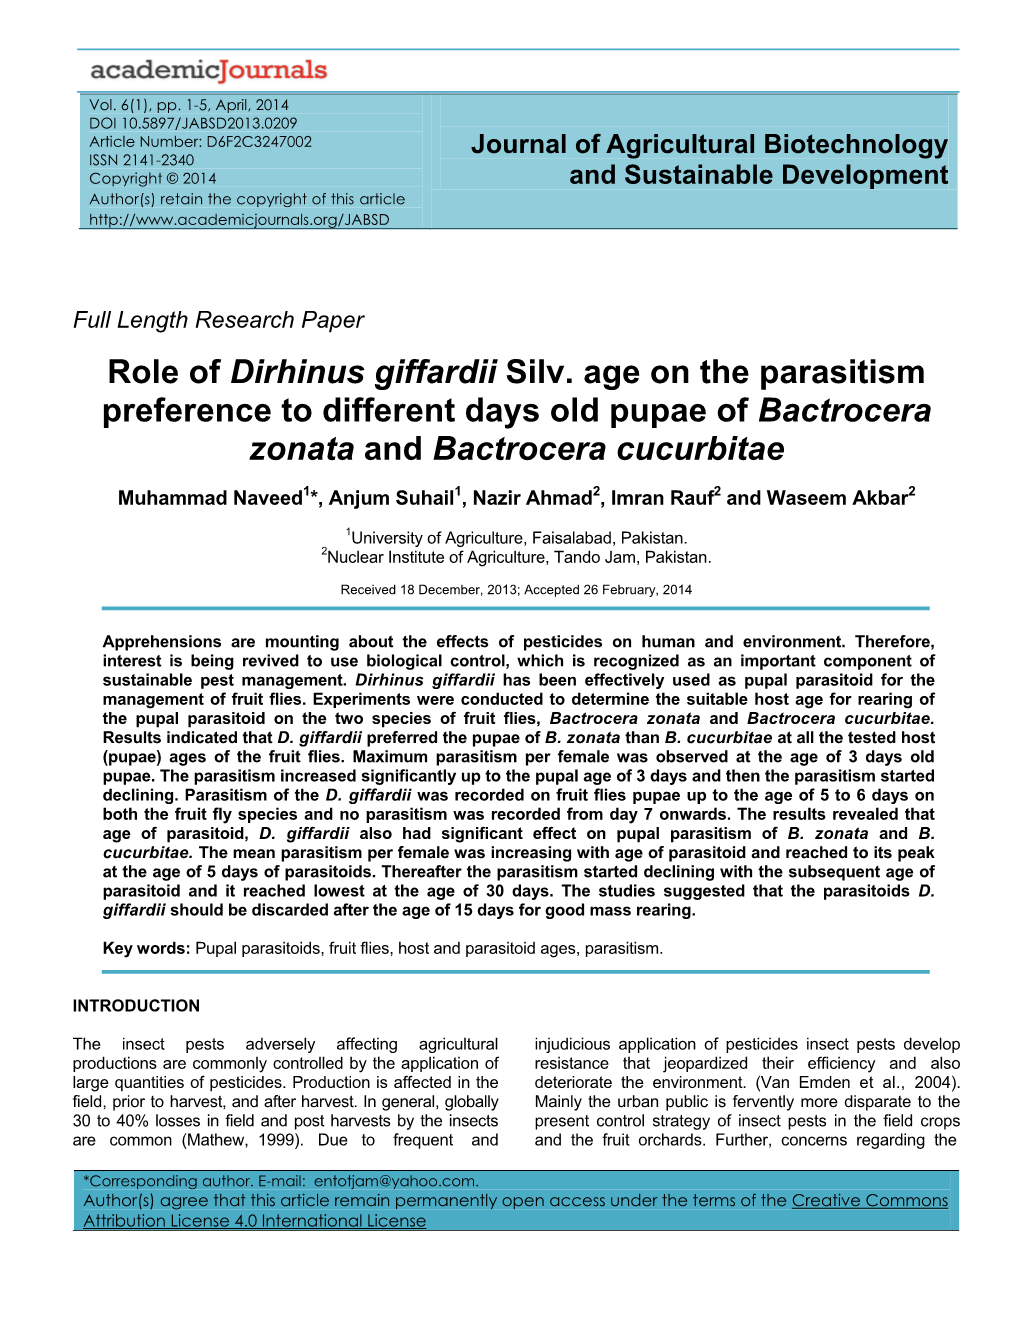 Role of Dirhinus Giffardii Silv. Age on the Parasitism Preference to Different Days Old Pupae of Bactrocera Zonata and Bactrocera Cucurbitae